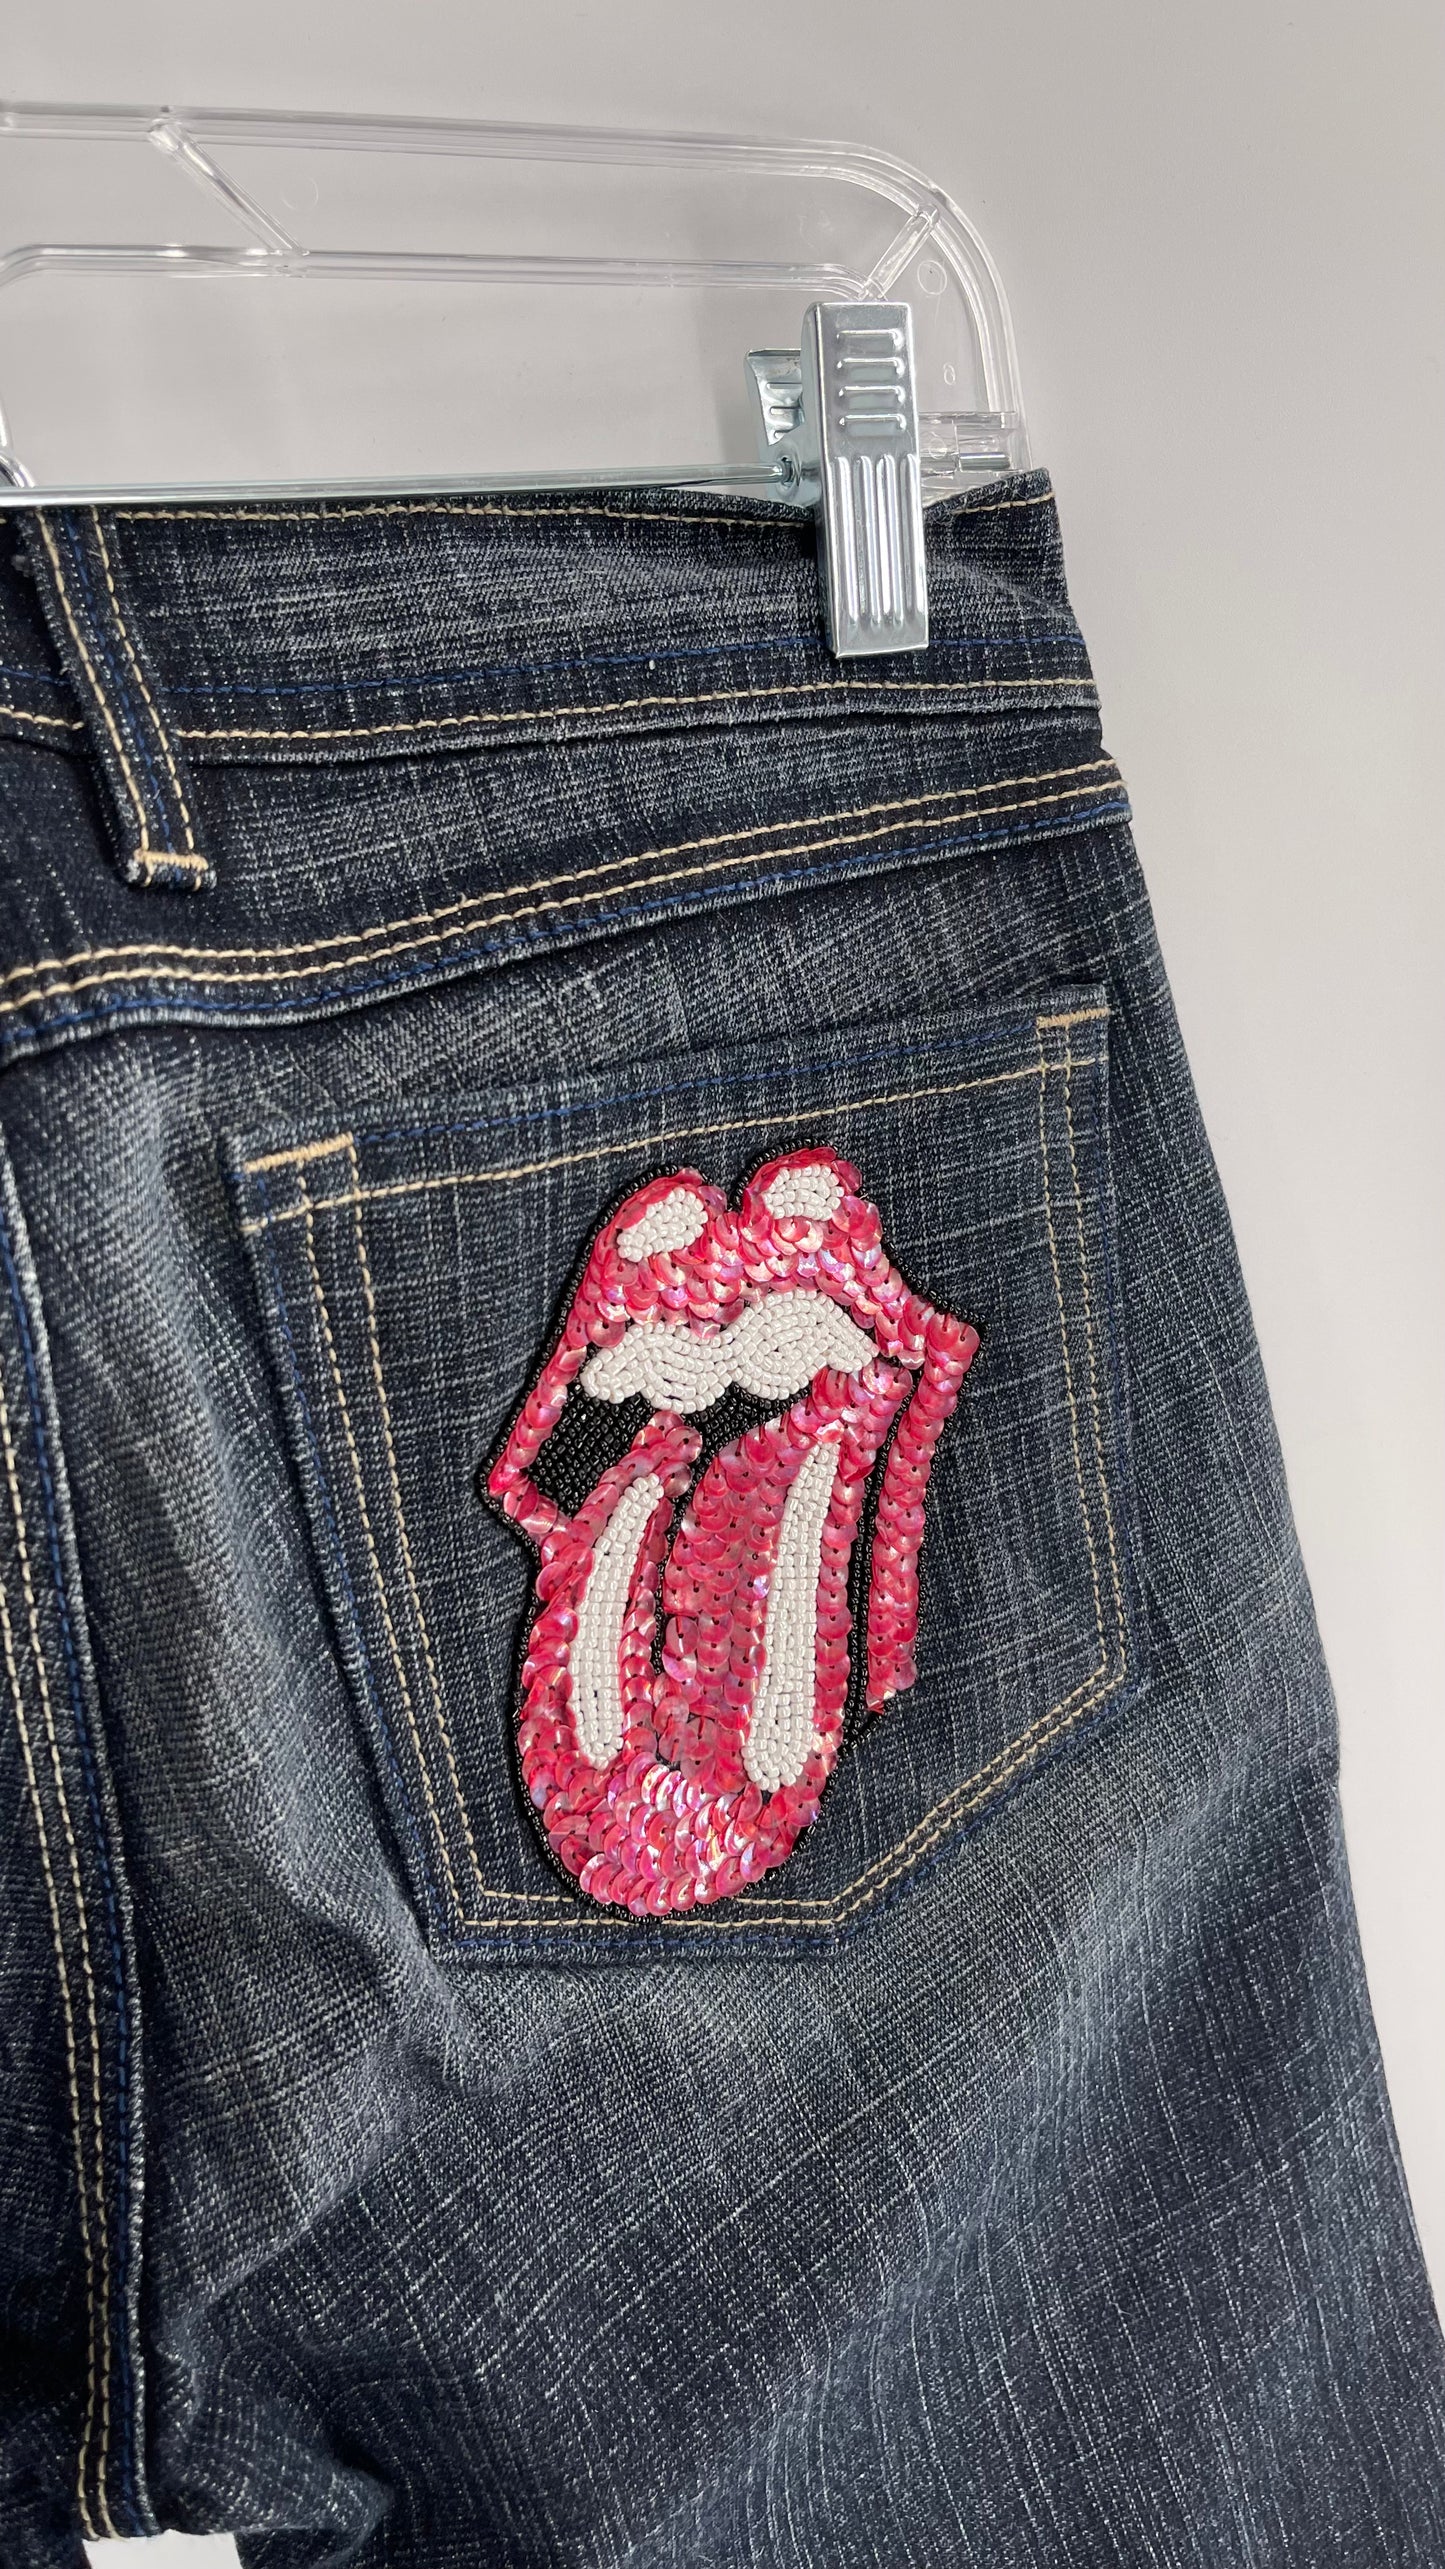 Vintage Smart AS JEANS Dark Wash with Grain and Embroidered/Embellished Kiss Rock Logo (28)